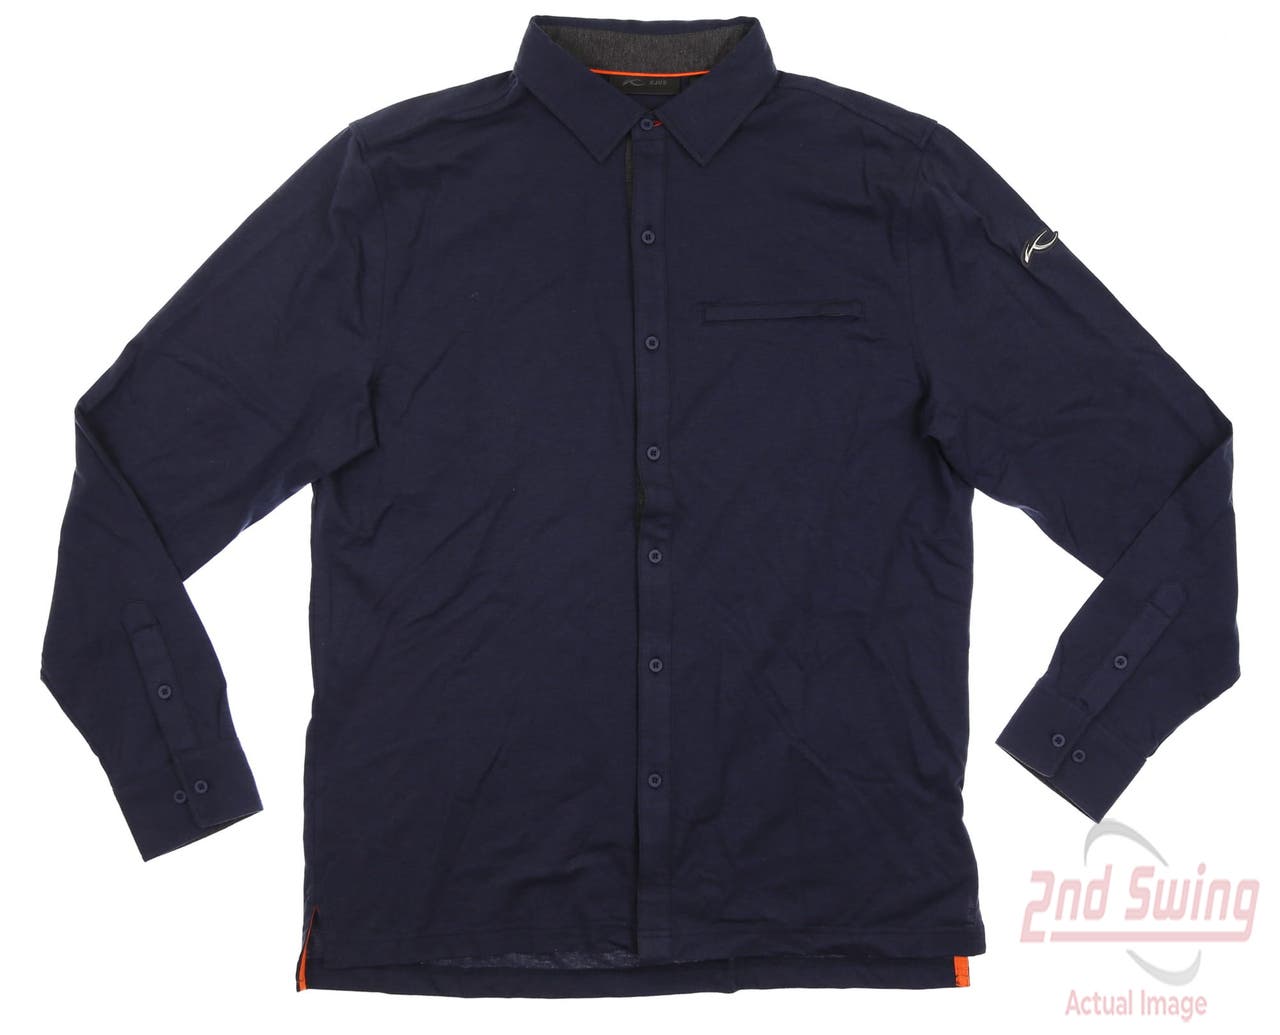 New Mens KJUS Inverness Shirt Small S Navy Blue MSRP $239